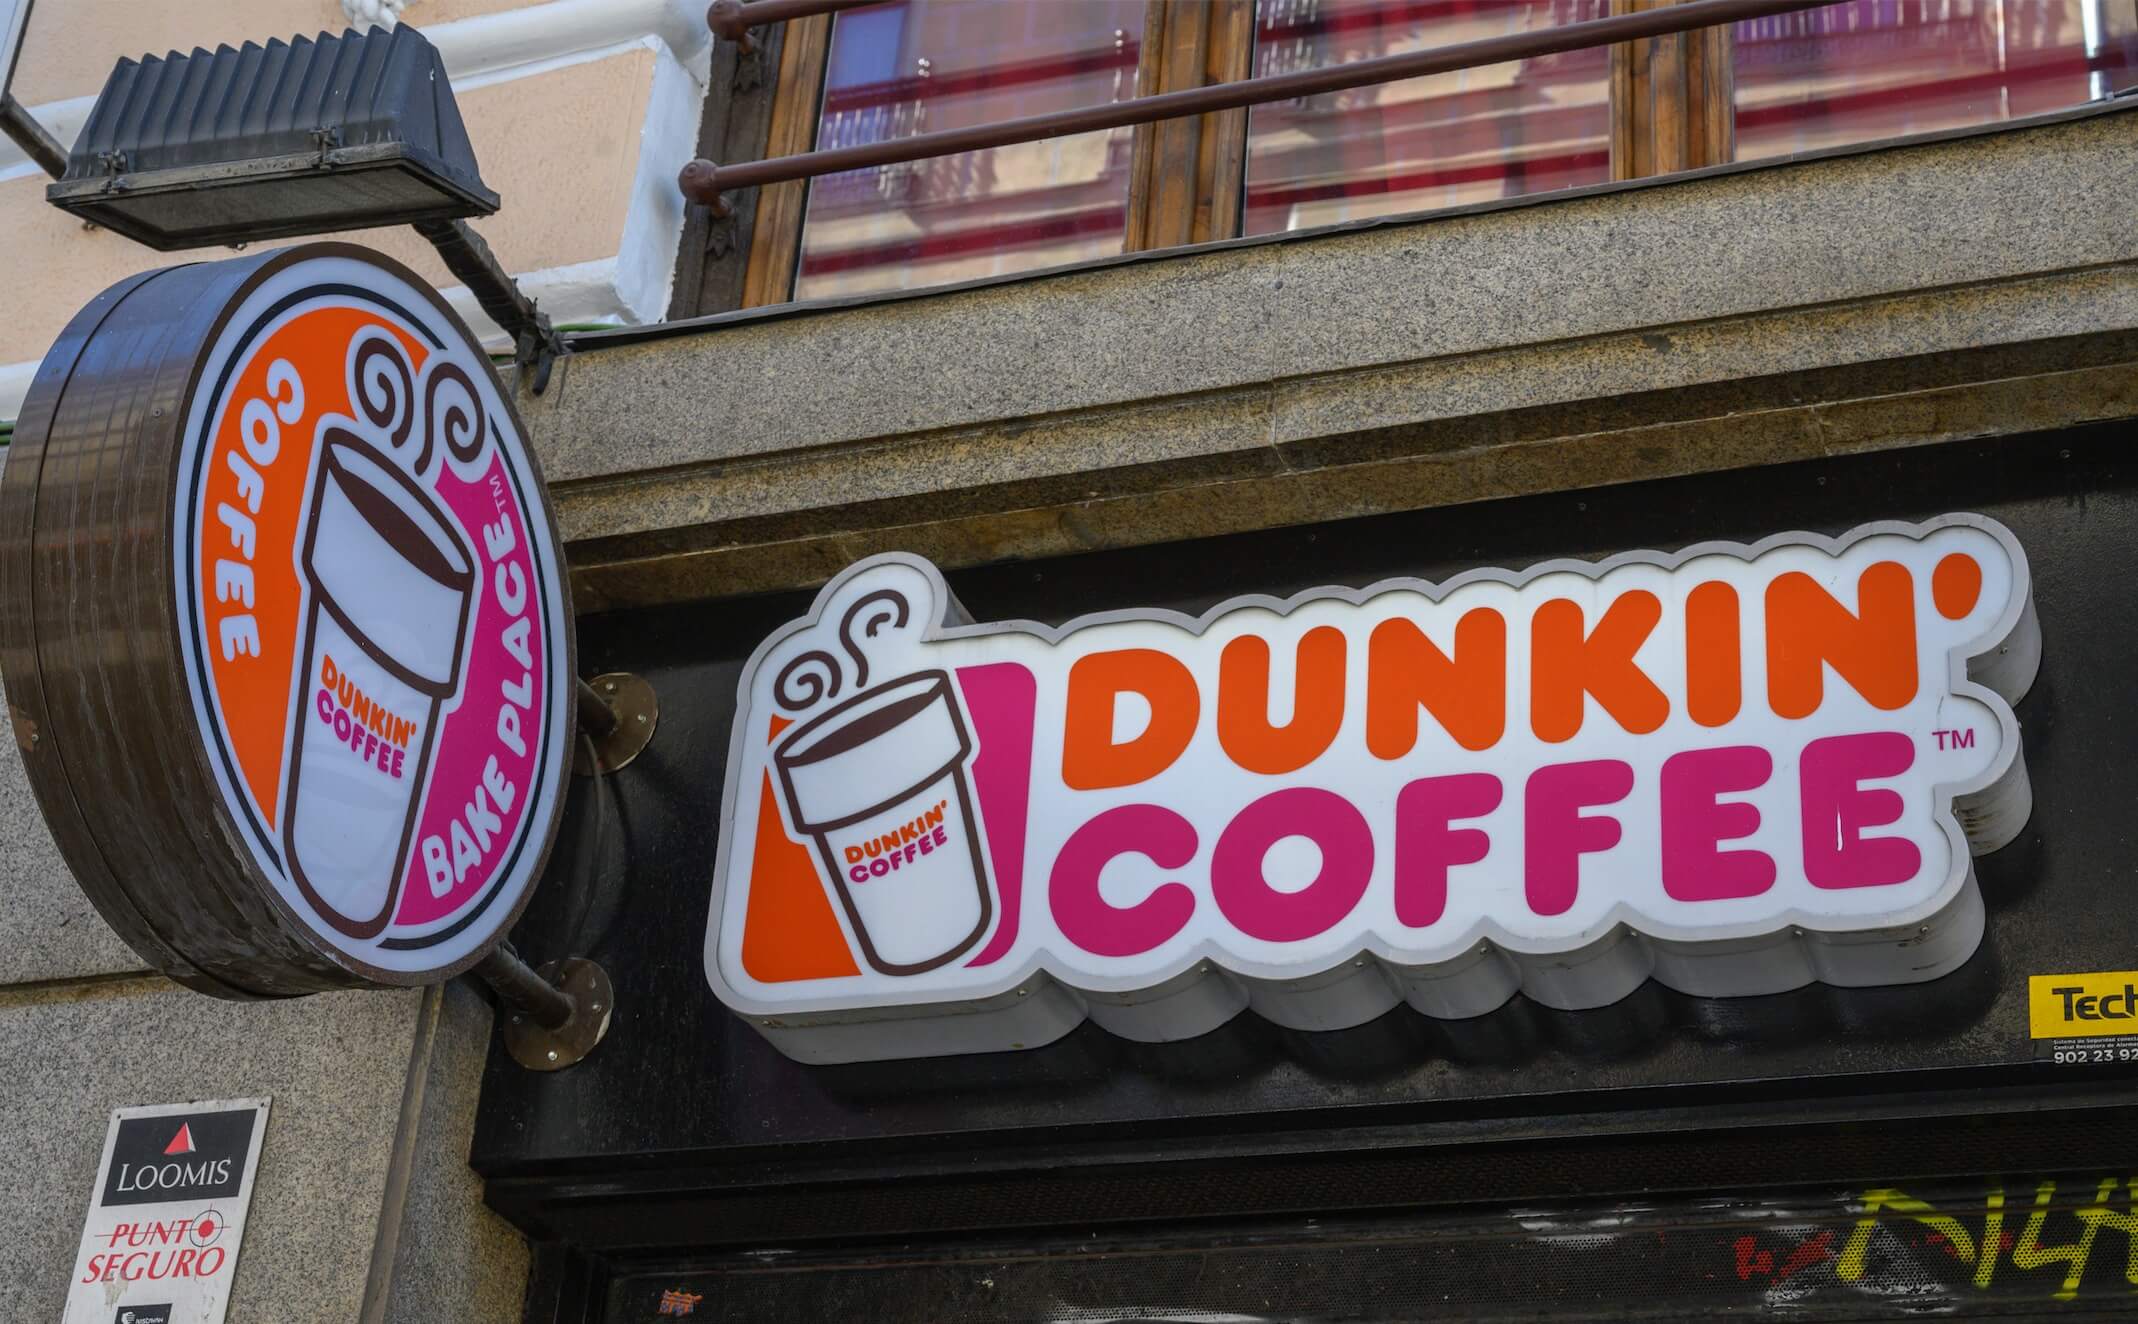 Is Dunkin Donuts Starbucks open closed on Christmas Day Eve? Metro US